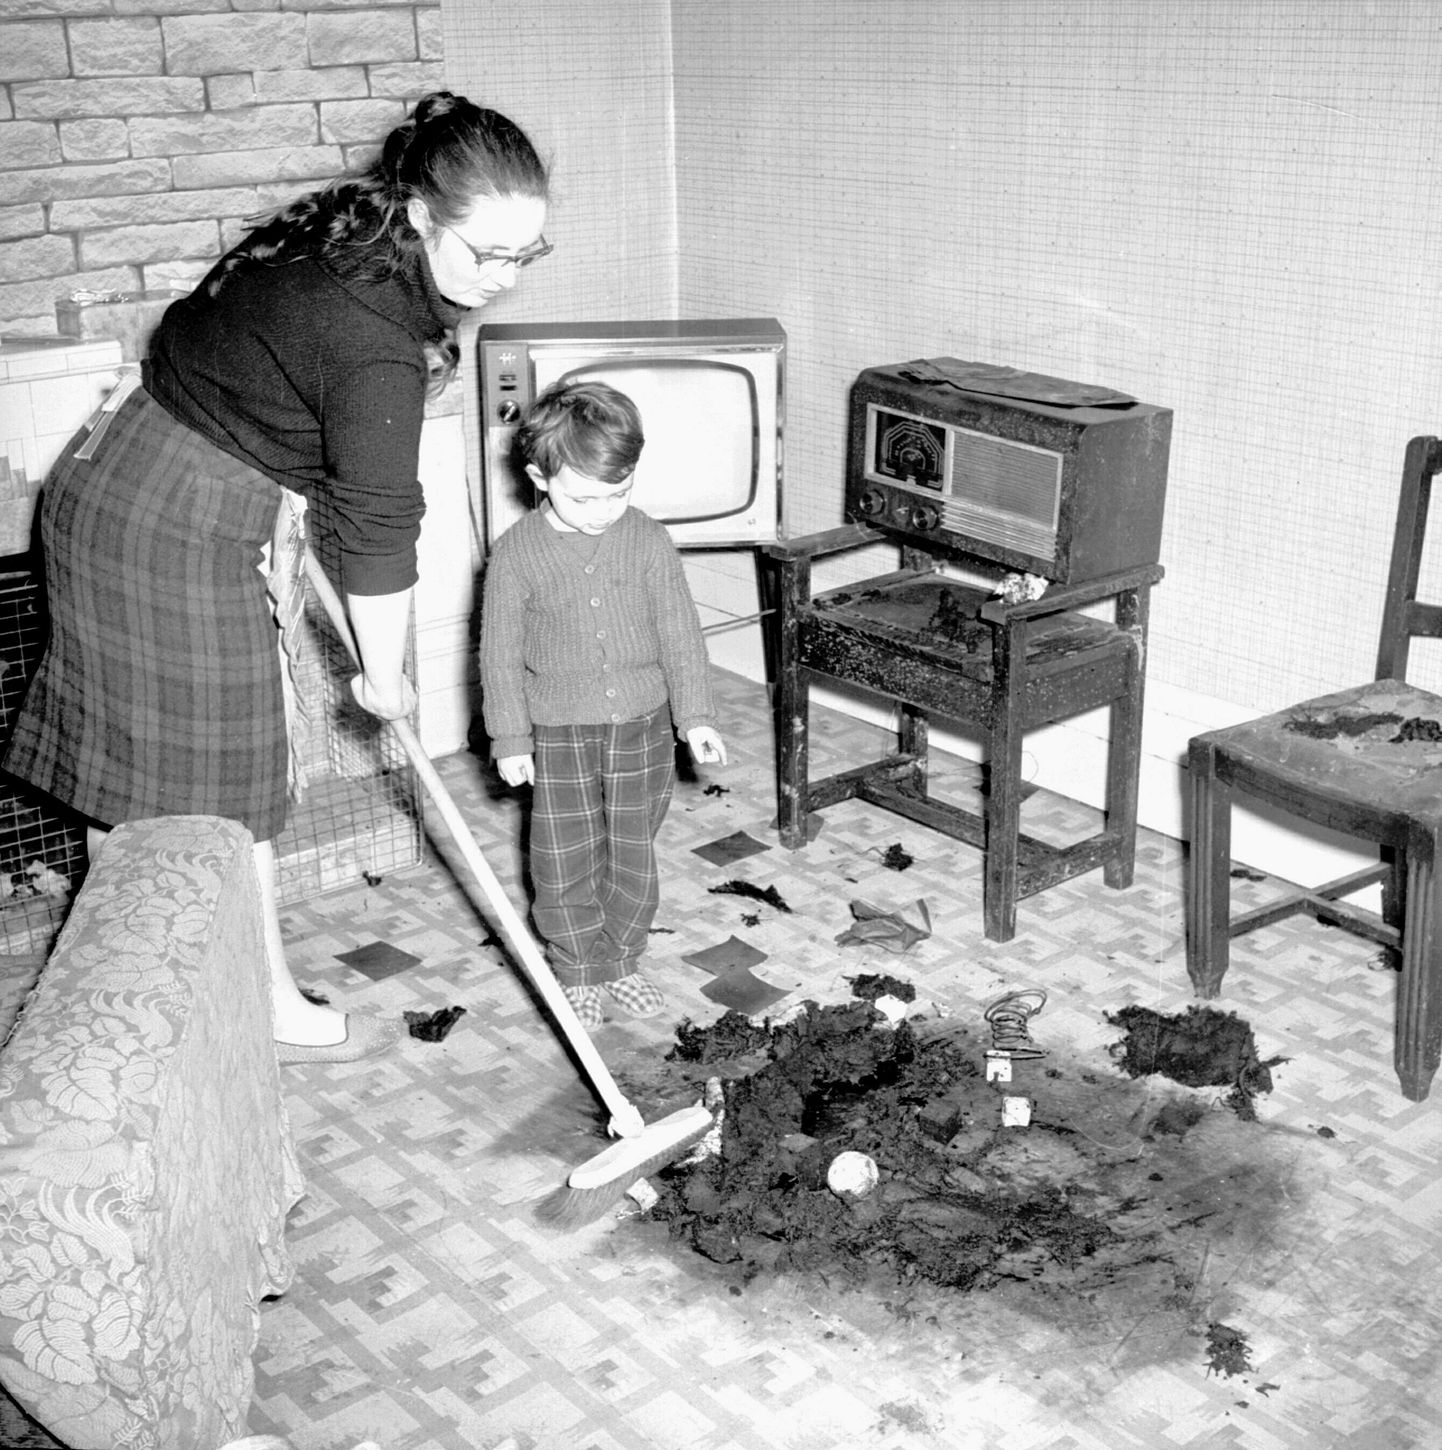 The Peckham Poltergeist strikes again! Mrs Vera Stringer cleans up after the visit from their pyromaniac poltergeist.
10th April 1962